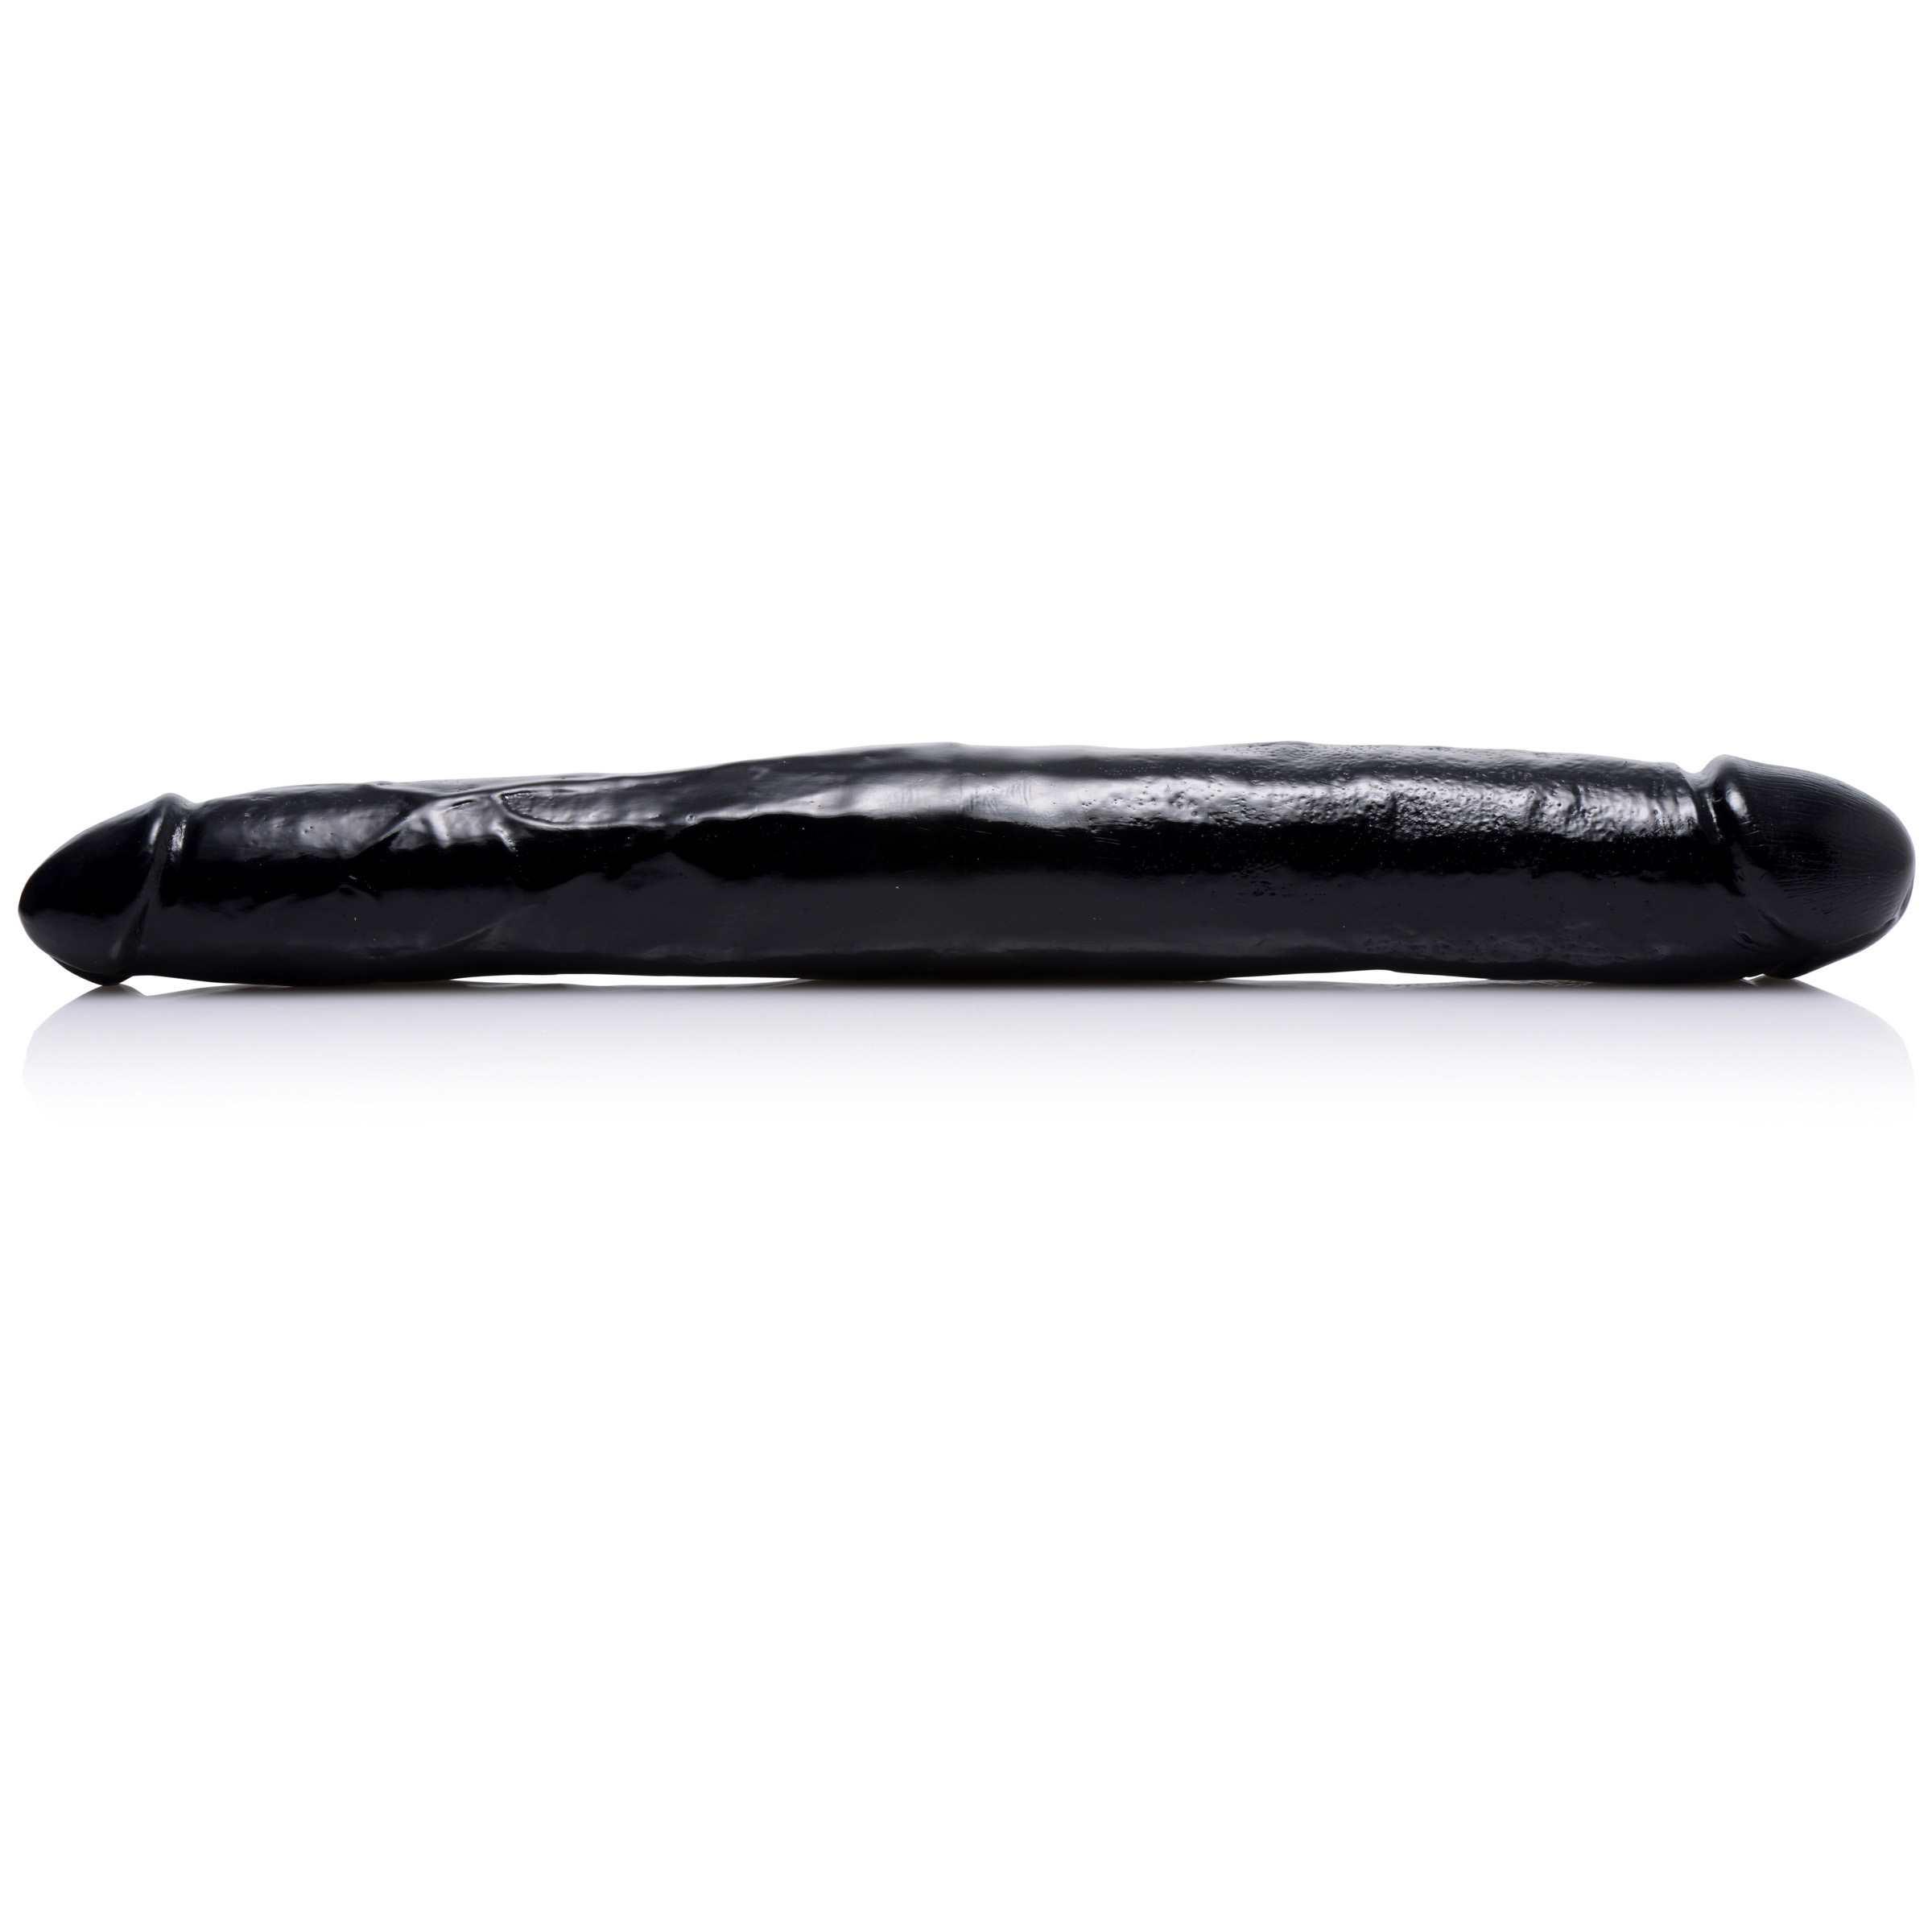 Realistic 17.5 Inch Double Dong – Black